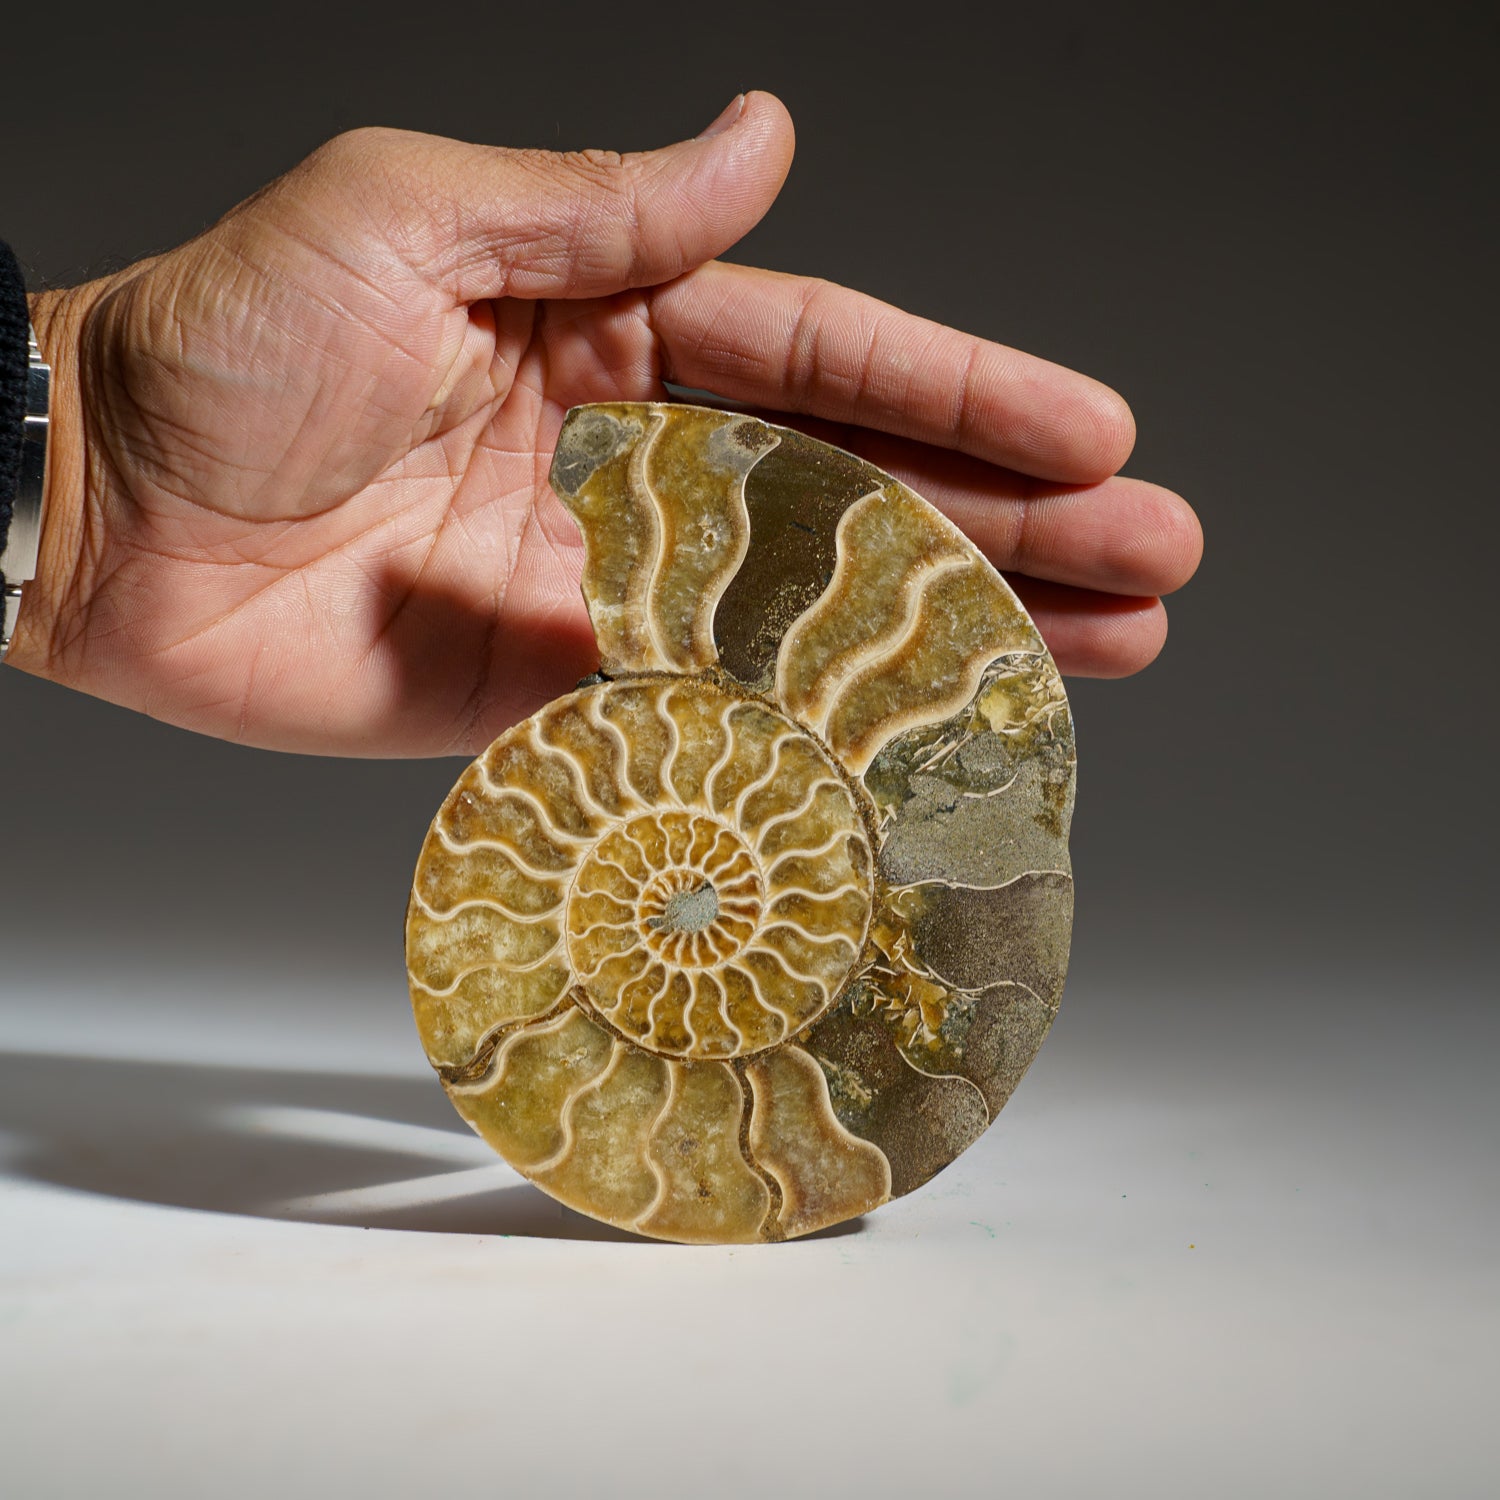 Calcified Ammonite Halve From Madagascar (237.1 grams)